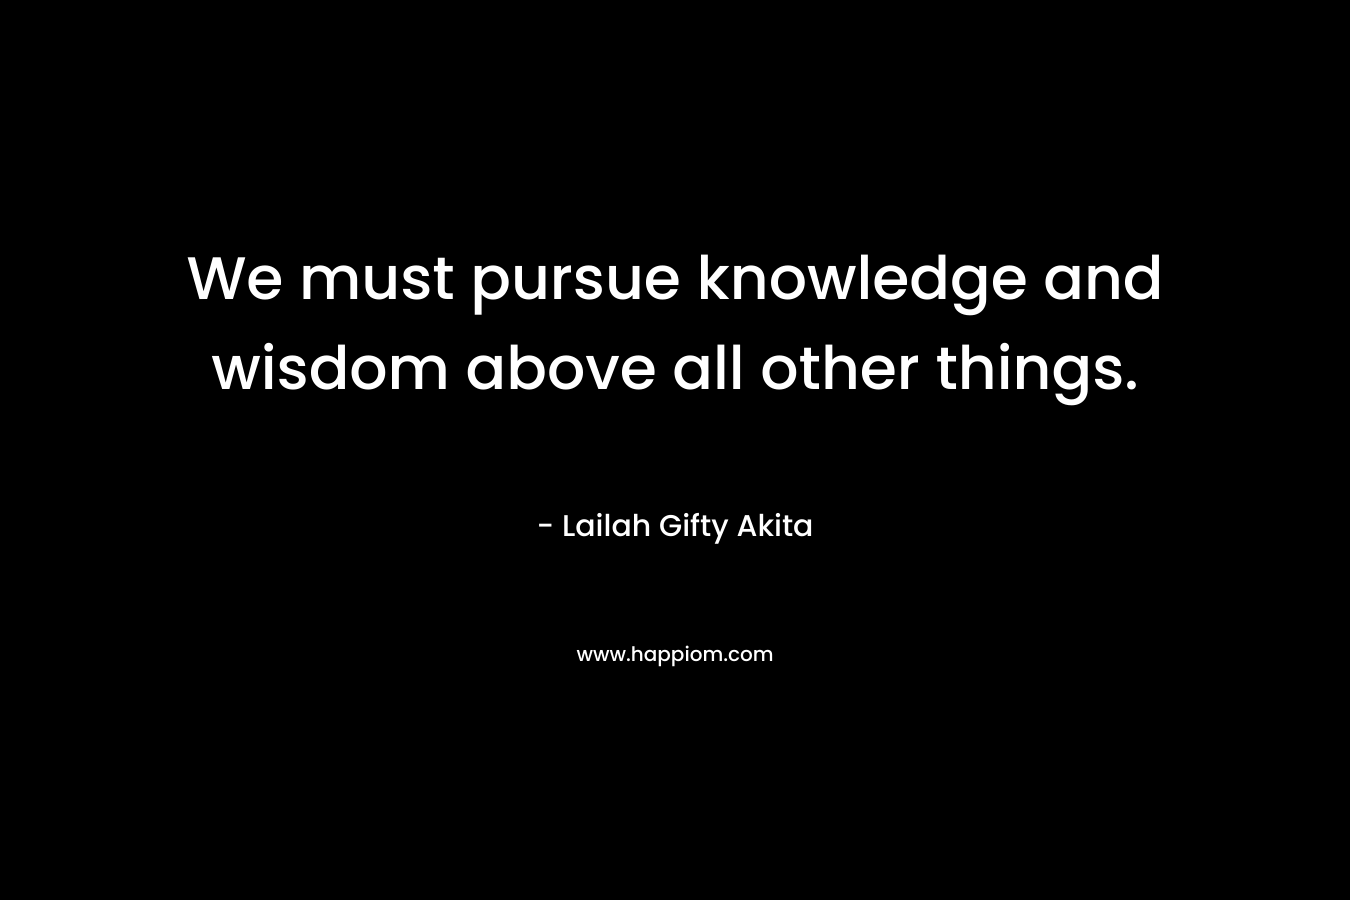 We must pursue knowledge and wisdom above all other things.